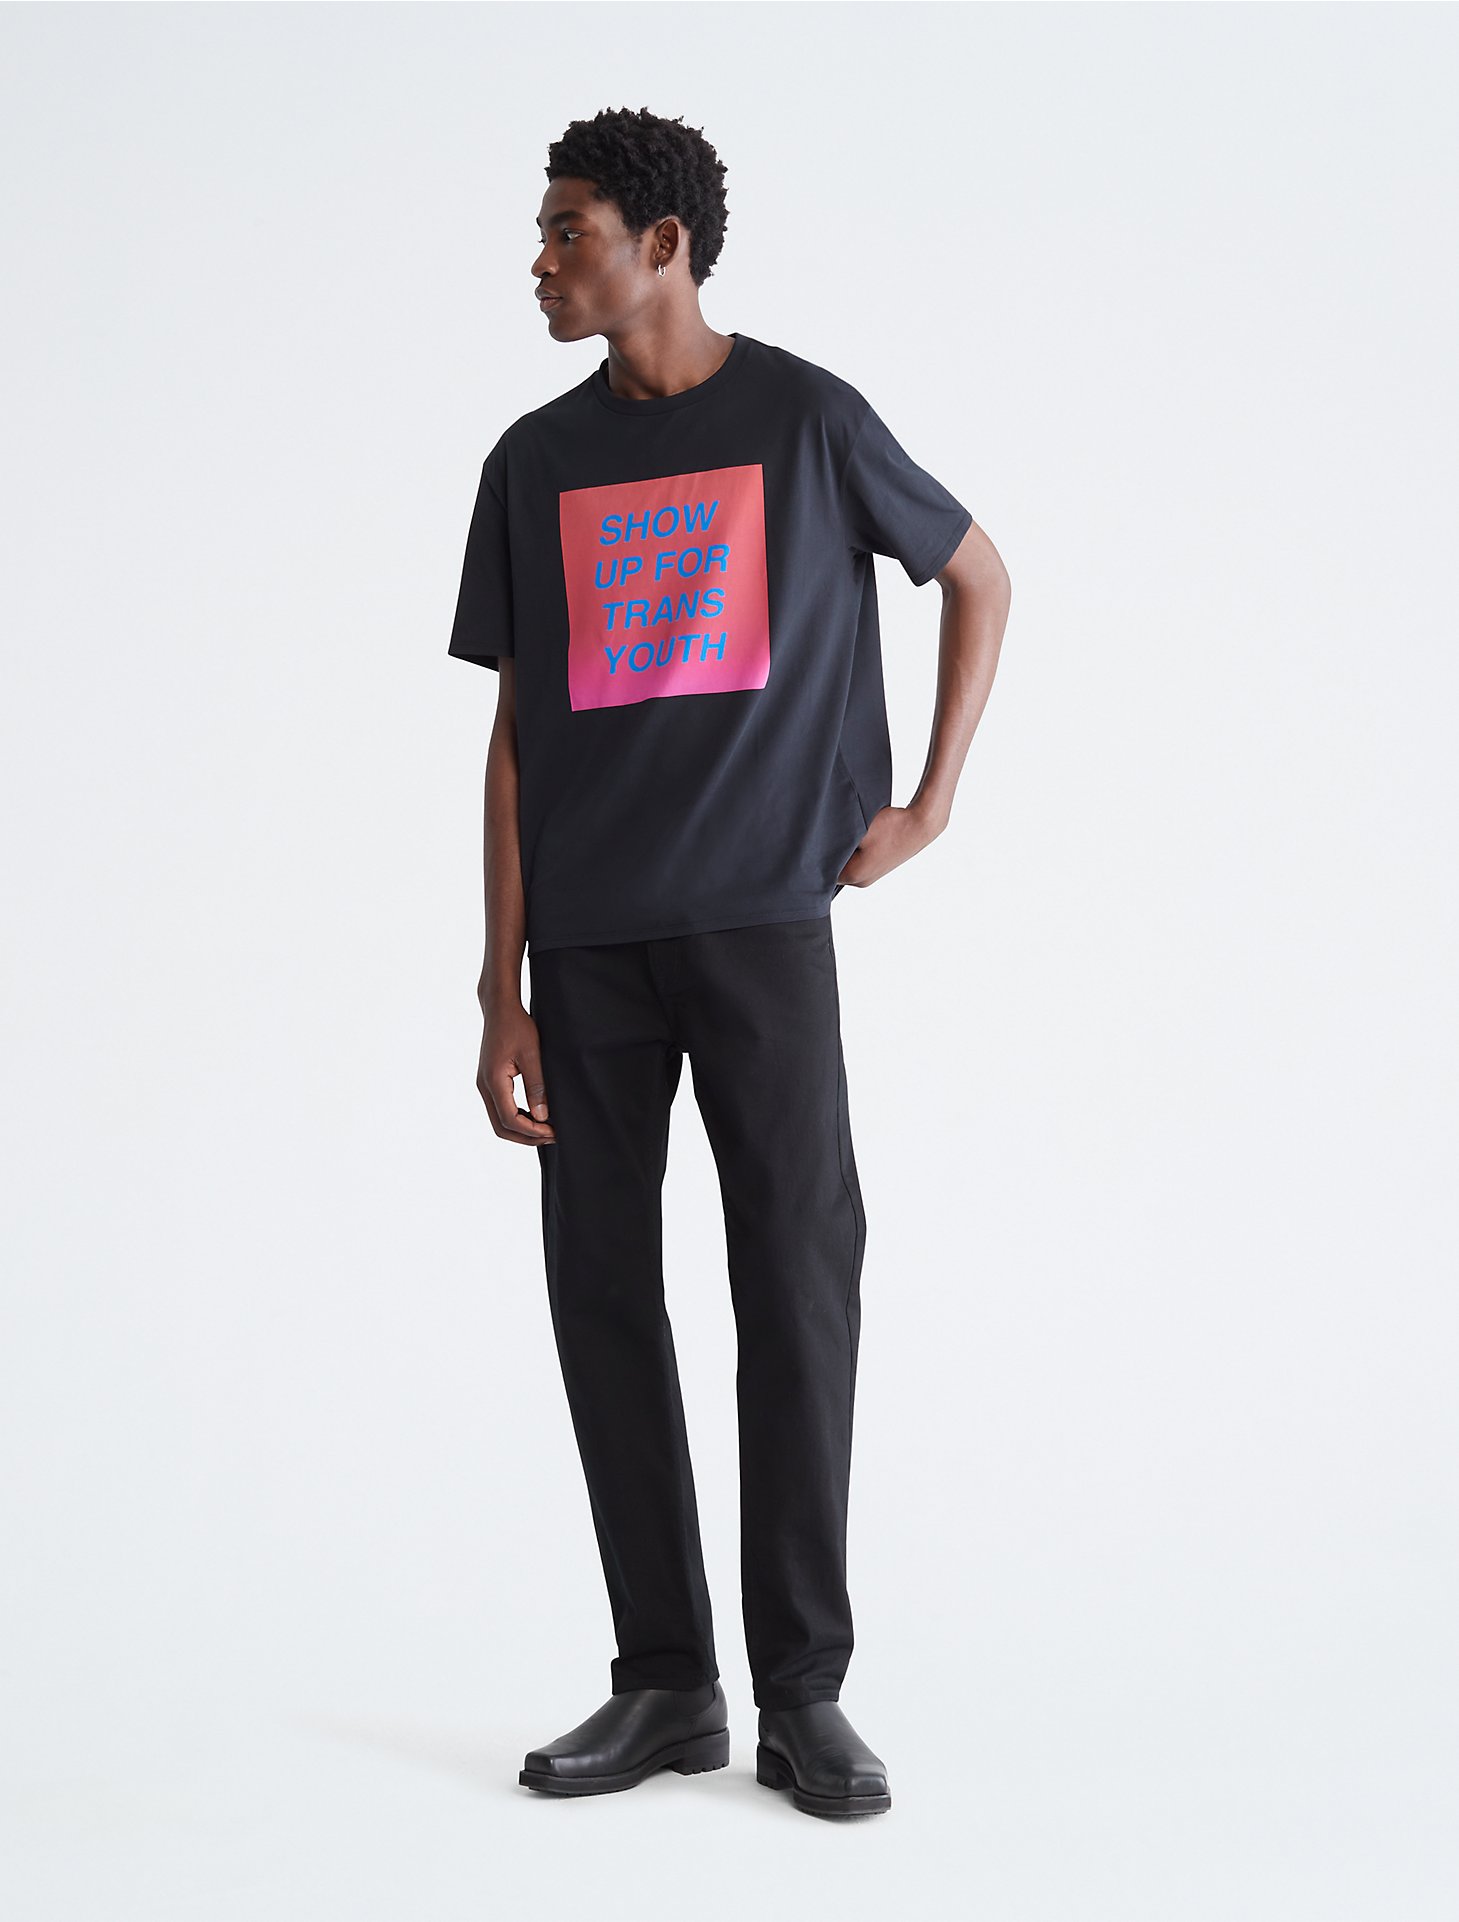 Kong Lear Picket fordampning Pride Relaxed Show Up Crewneck T-Shirt | Calvin Klein